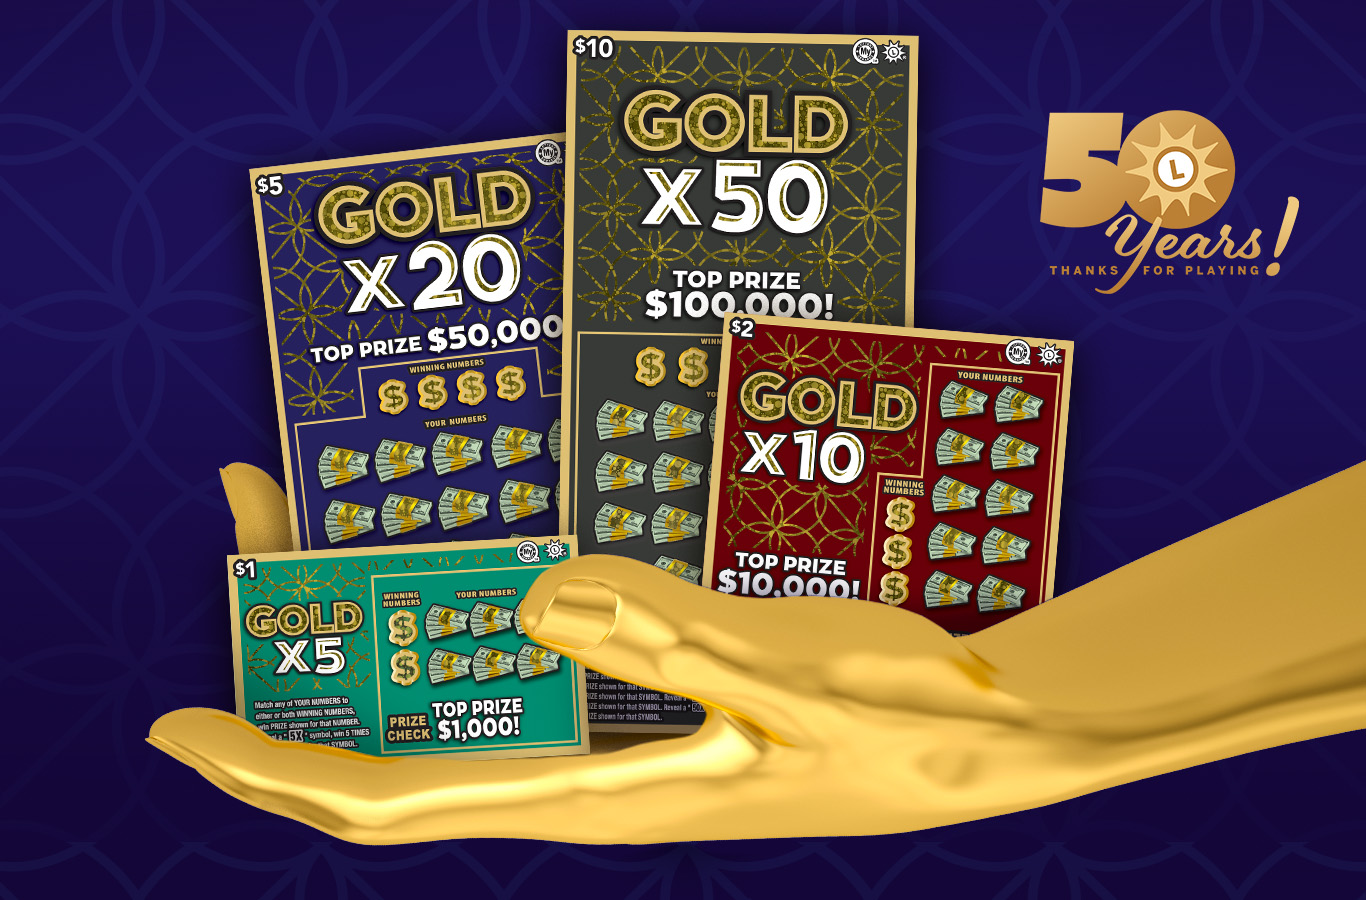 Enter non-winning Gold Multiplier Scratch-Offs for your chance to win one of five $50,000 prizes!